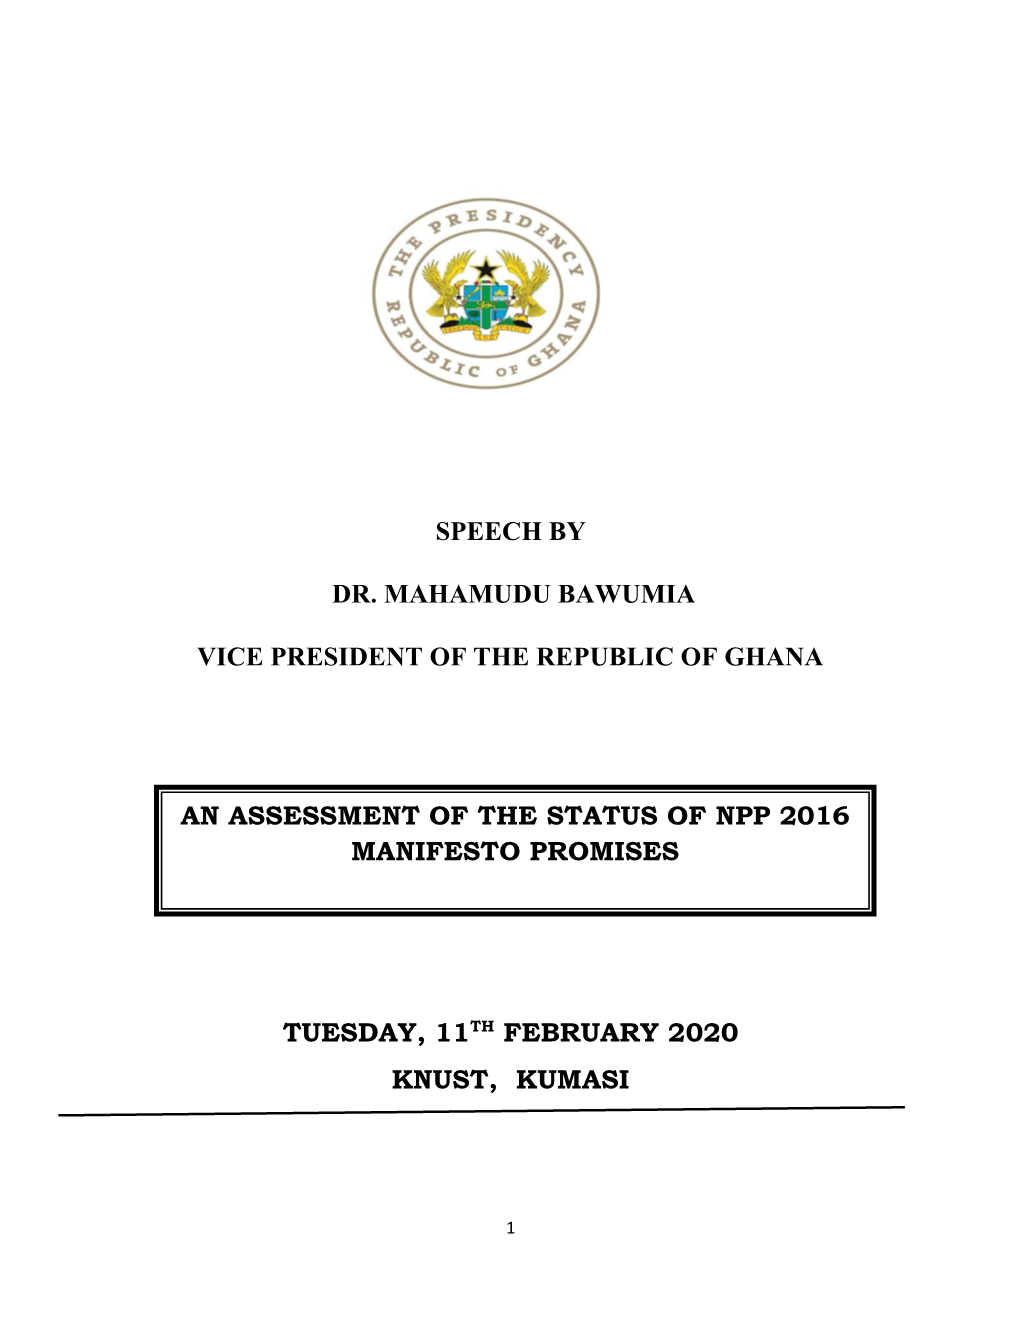 Speech by Dr. Mahamudu Bawumia Vice President of the Republic of Ghana Tuesday, 11Th February 2020 Knust, Kumasi an Assessment